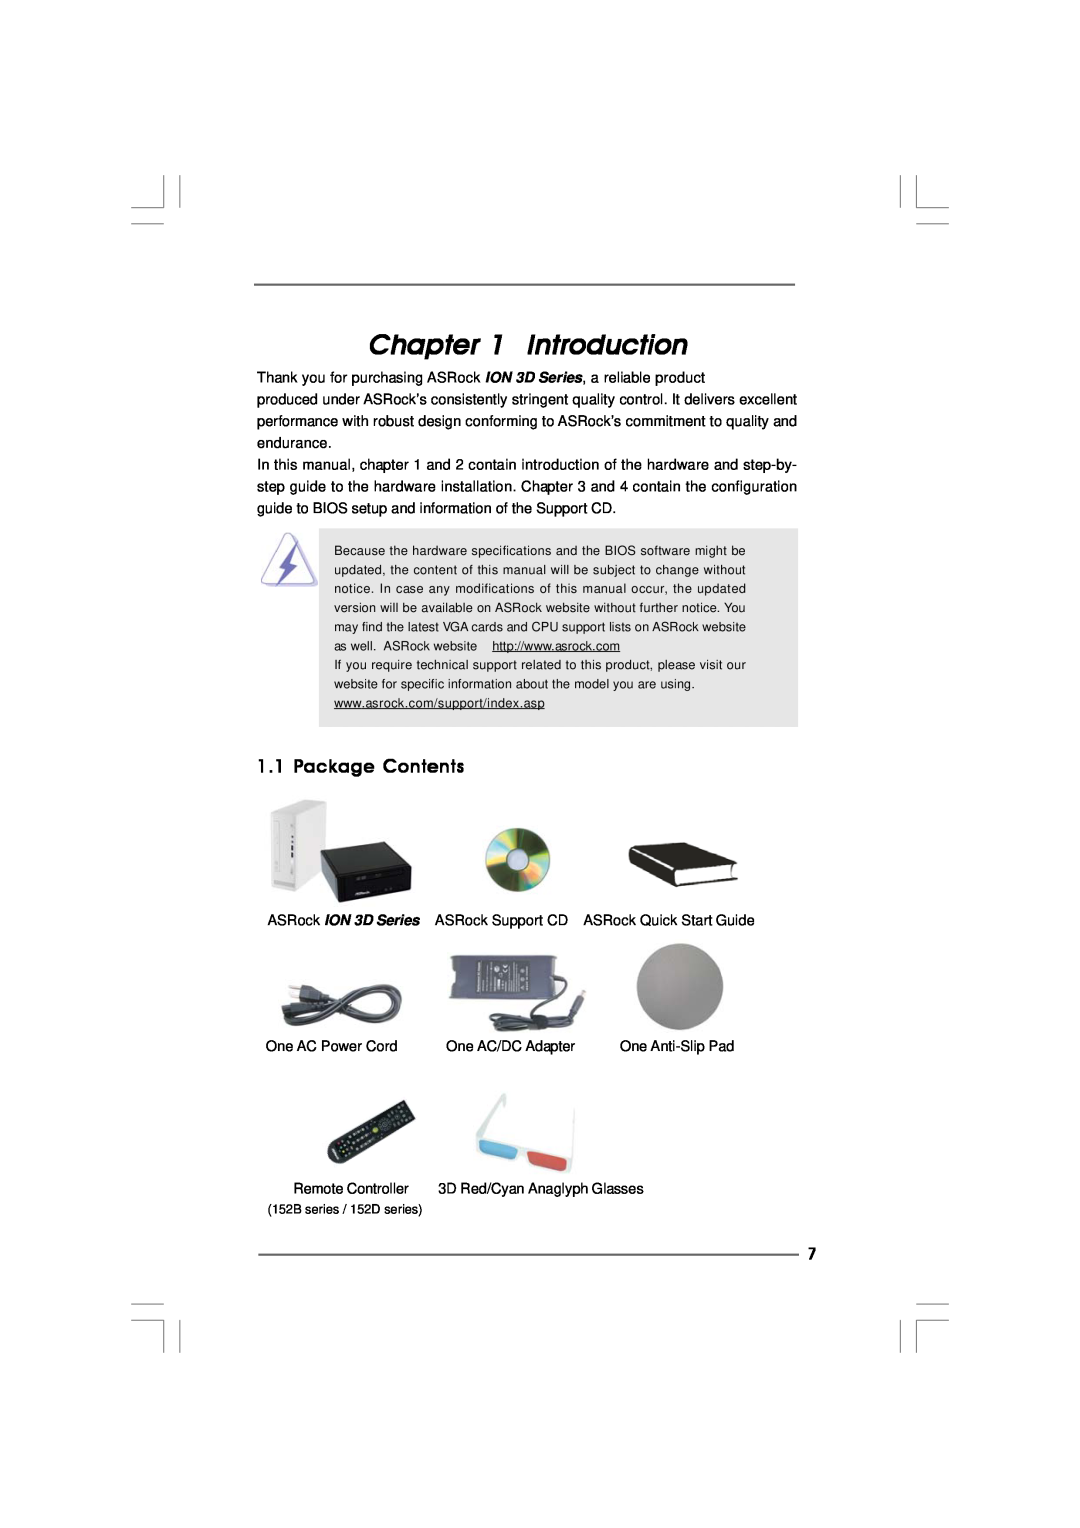 ASRock ION 3D Series manual Introduction, Package Contents 